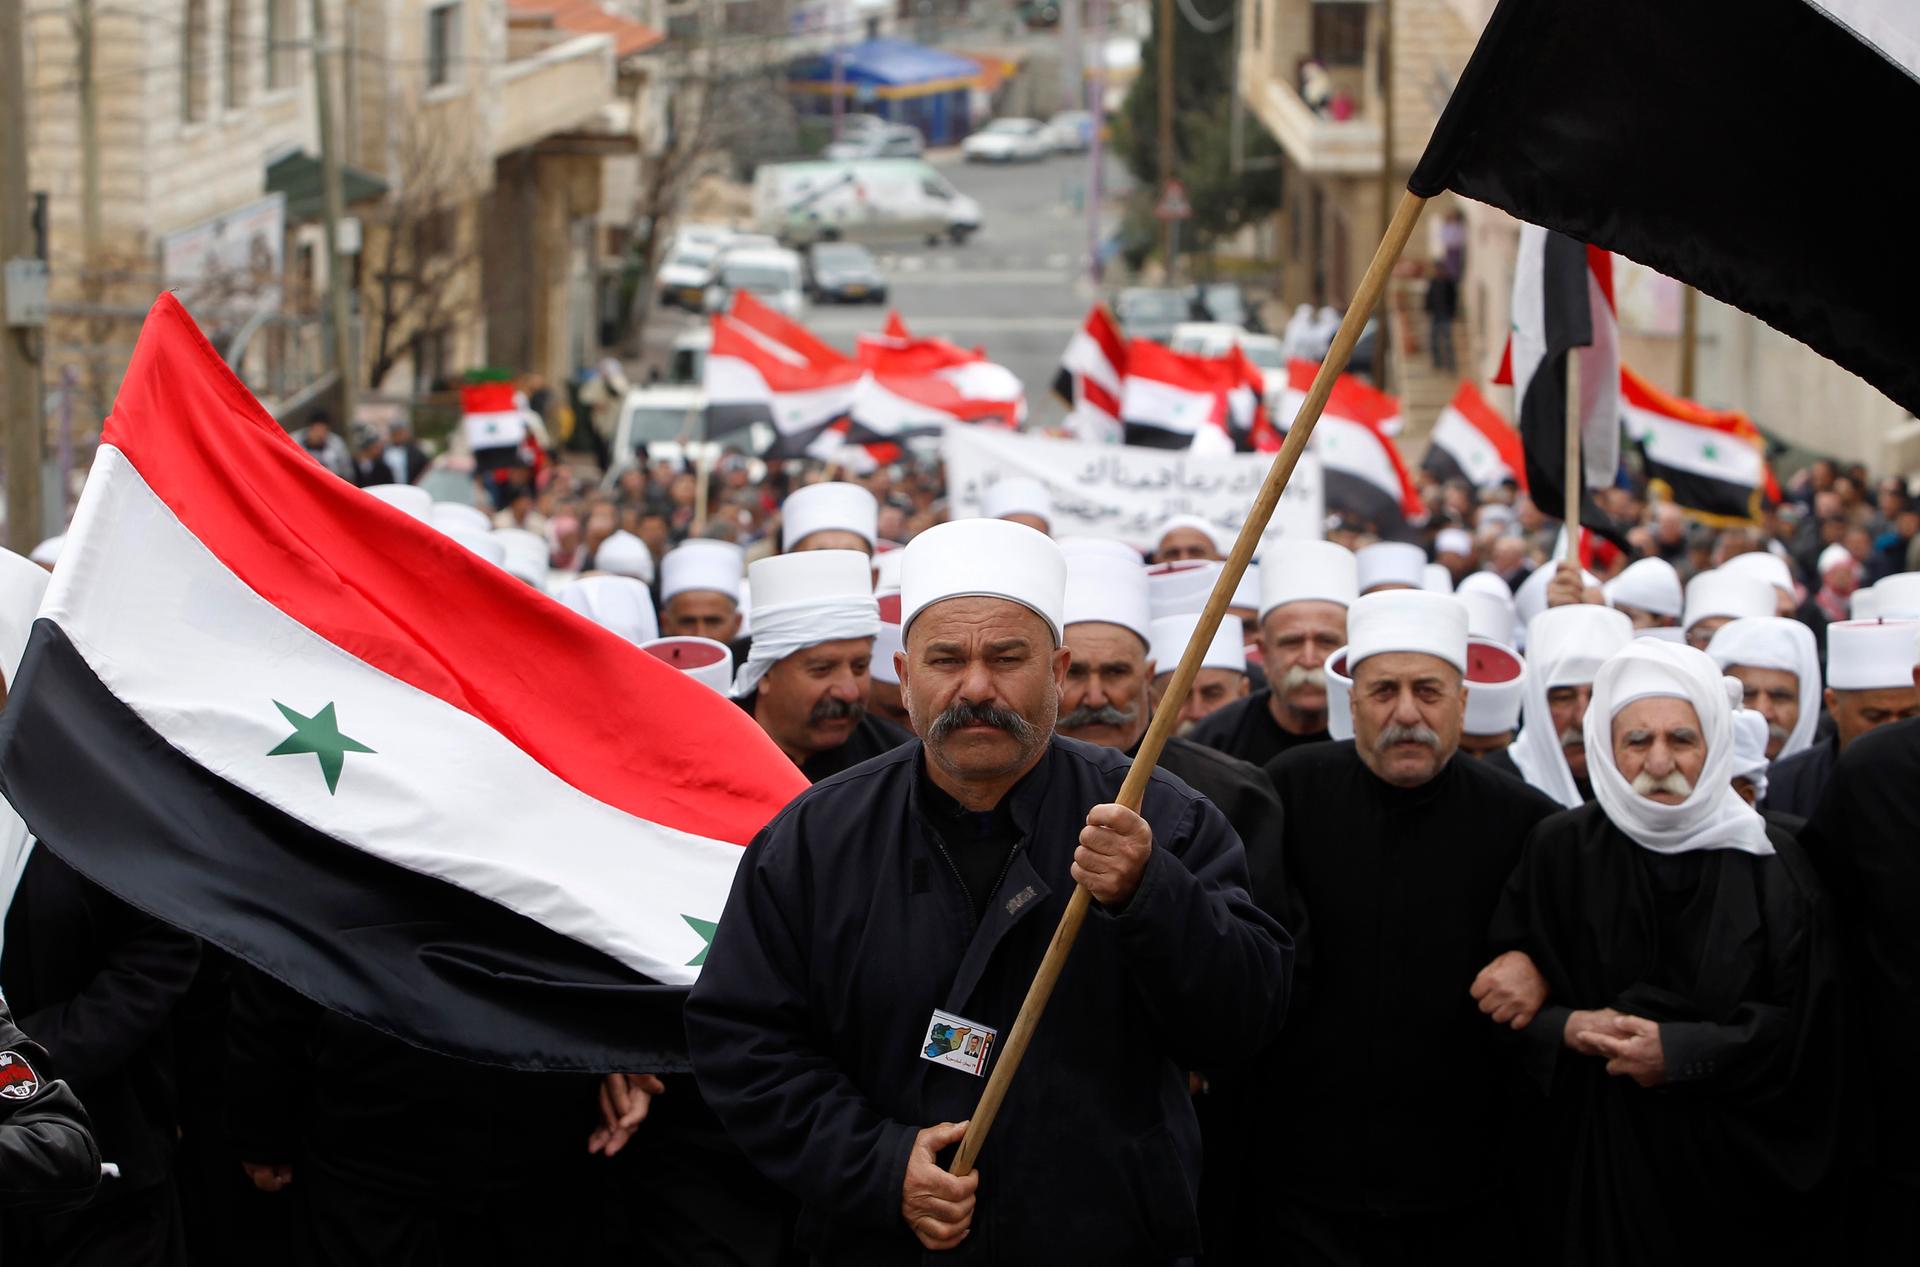 Members of the Druze community hold Syrian flags during a rally in the Druze village of Majdal Shams in the Golan Heights, Feb. 14, 2013.